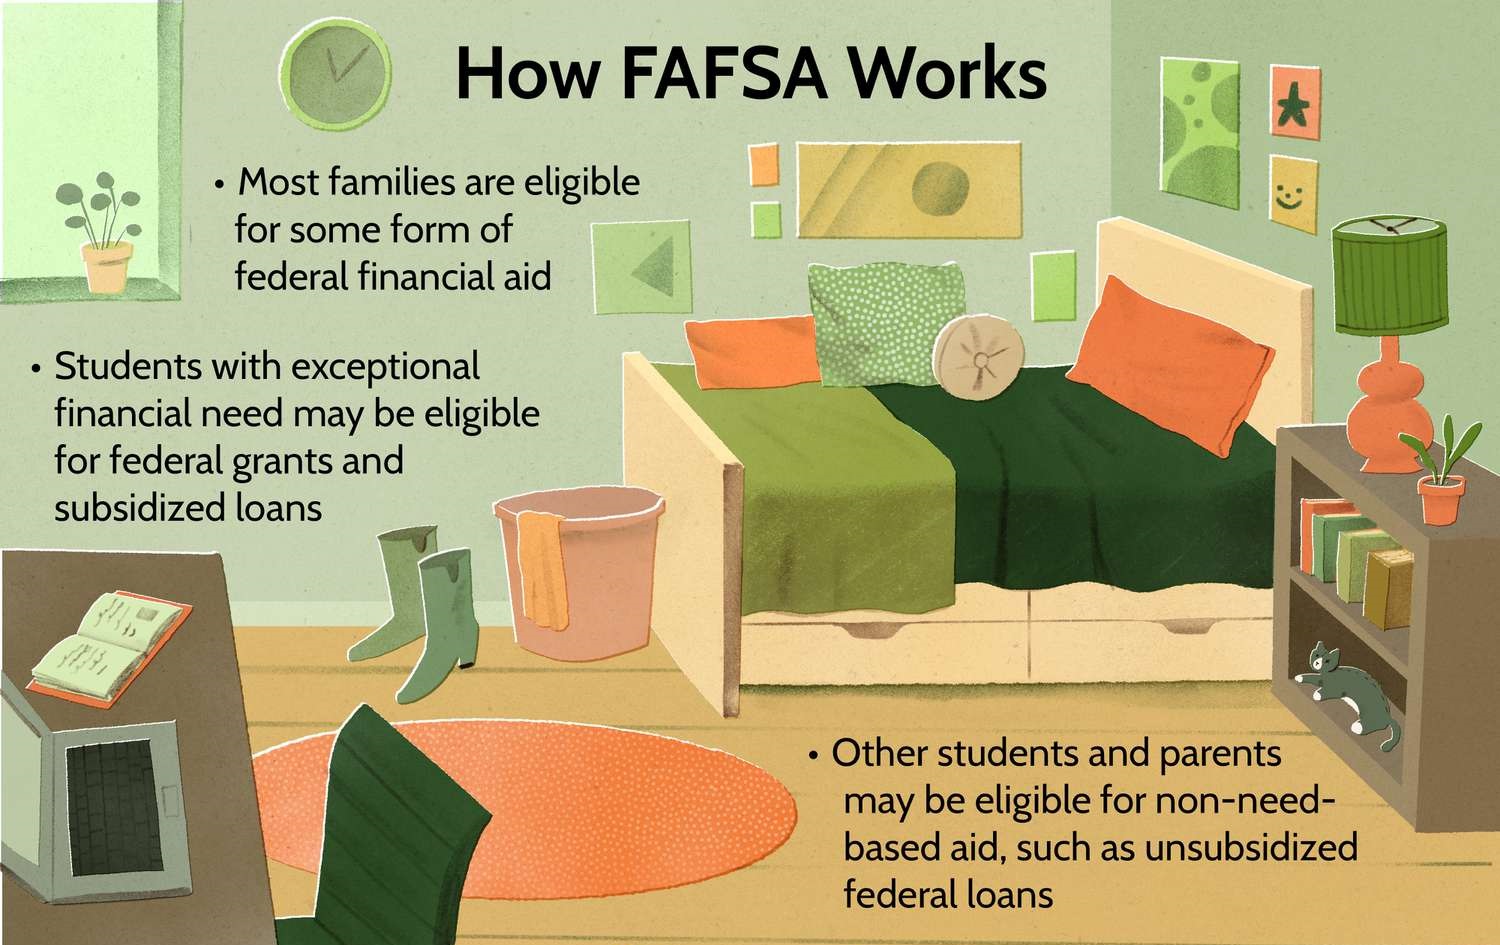 What Are Considered Investments For FAFSA